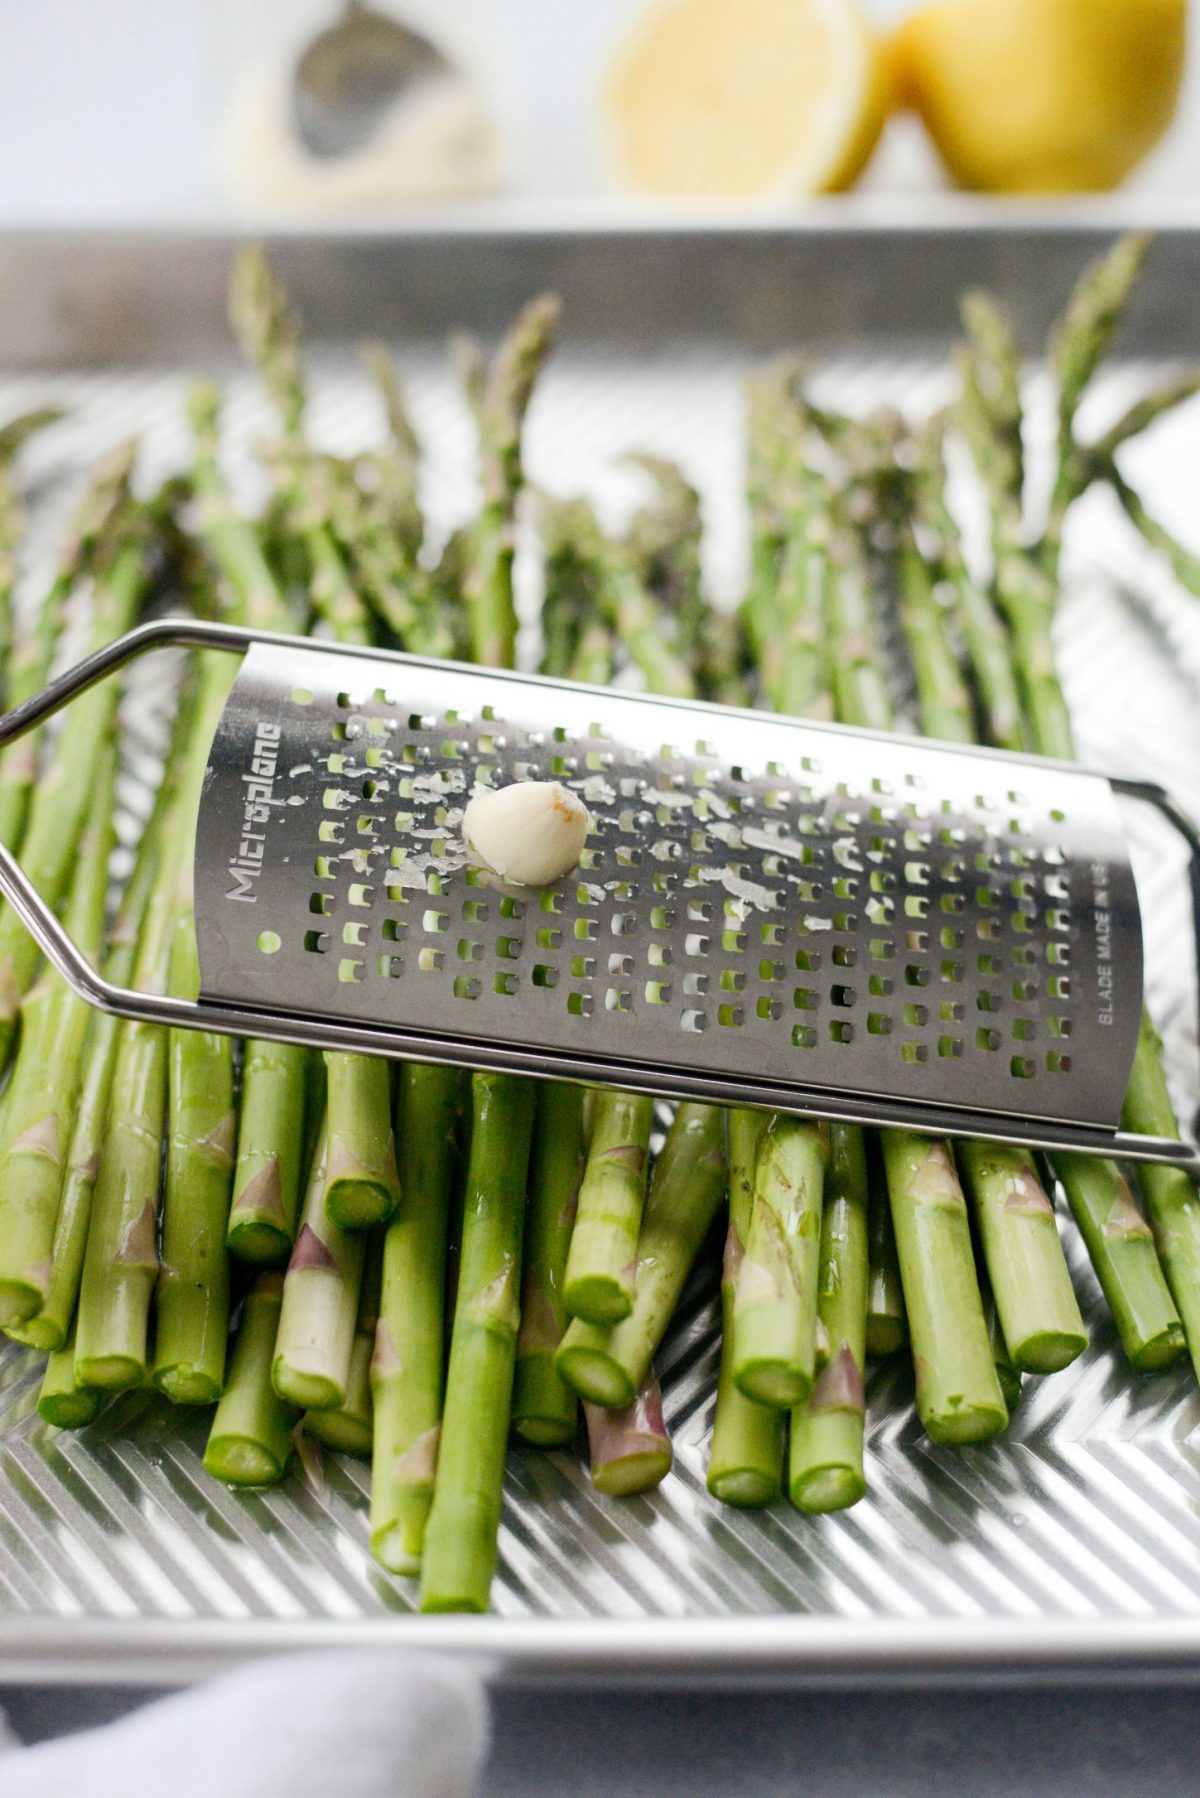 grate a large clove of garlic over the asparagus